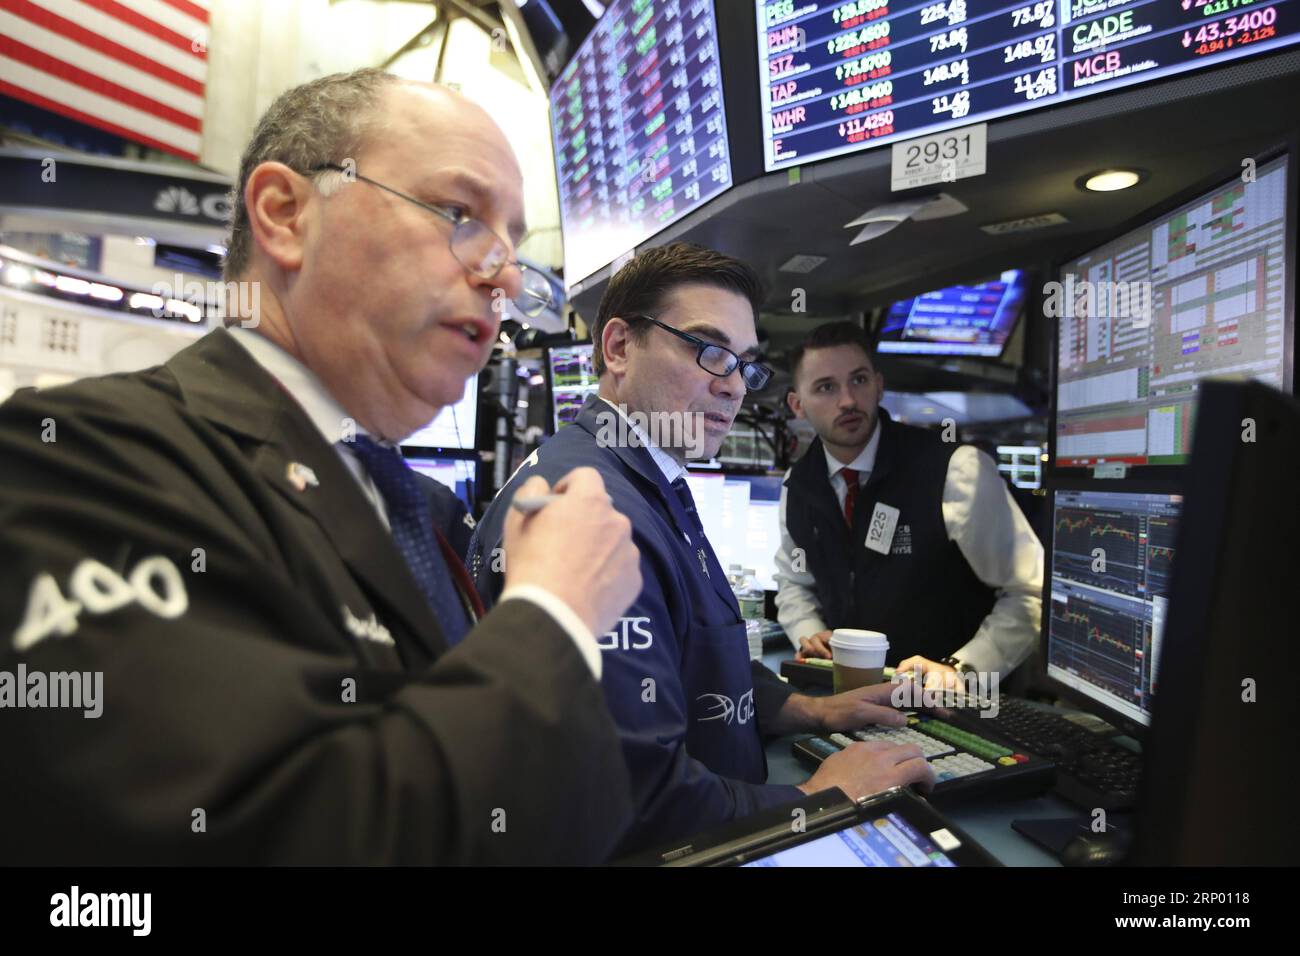 (180411) -- NEW YORK, April 11, 2018 -- Traders work at the New York Stock Exchange in New York, the United States, April 11, 2018. U.S. stocks closed lower on Wednesday. The Dow decreased 0.90 percent to 24,189.45, and the S&P 500 erased 0.55 percent to 2,642.19, while the Nasdaq lost 0.36 percent to 7,069.03. ) U.S.-NEW YORK-STOCKS WangxYing PUBLICATIONxNOTxINxCHN Stock Photo